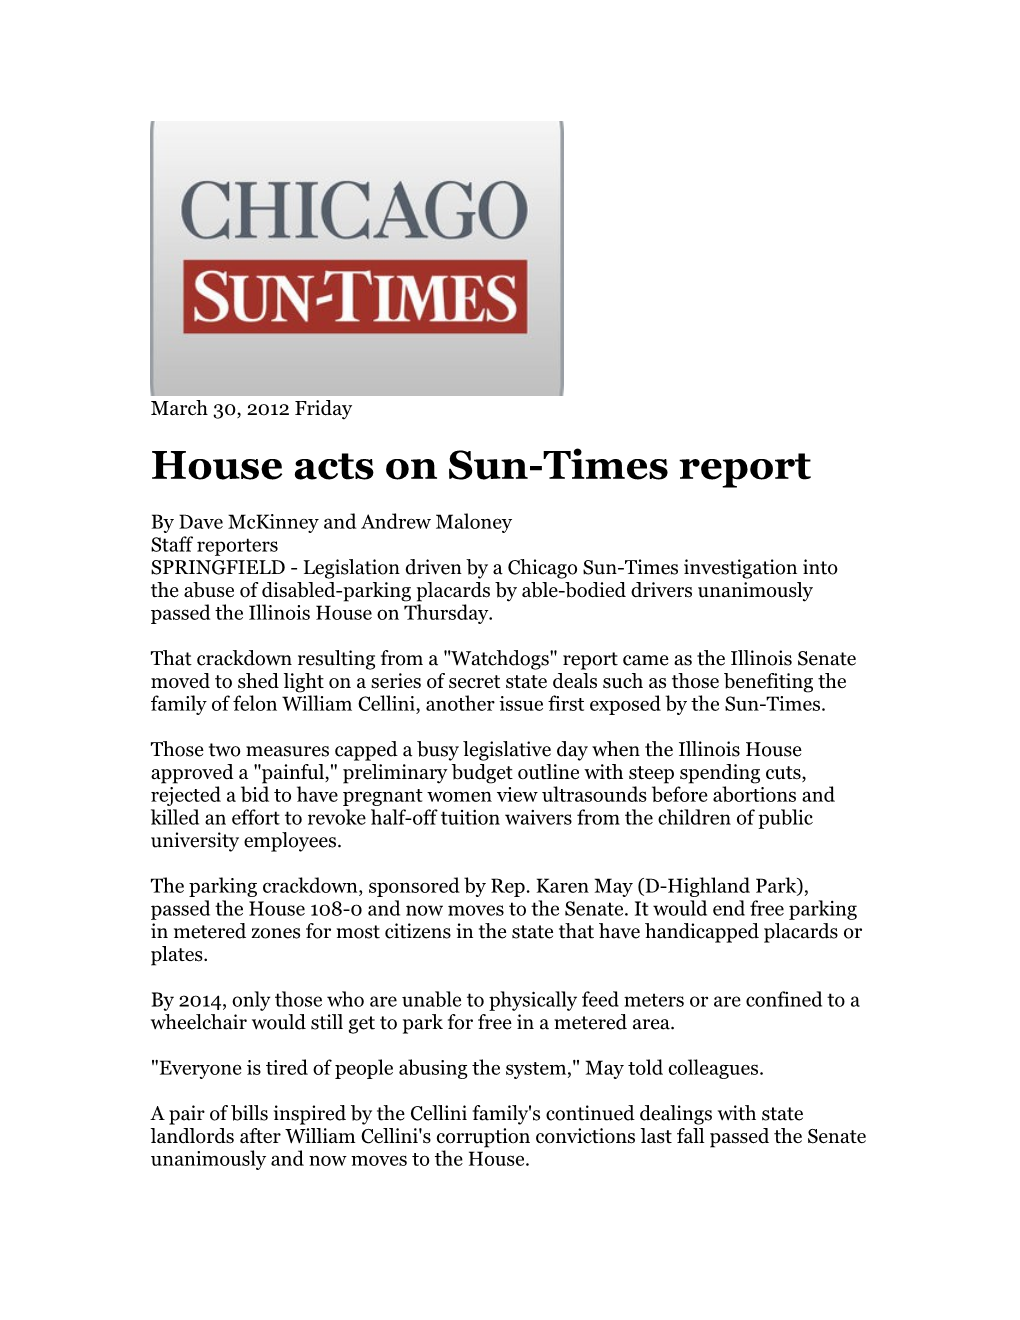 House Acts on Sun-Times Report